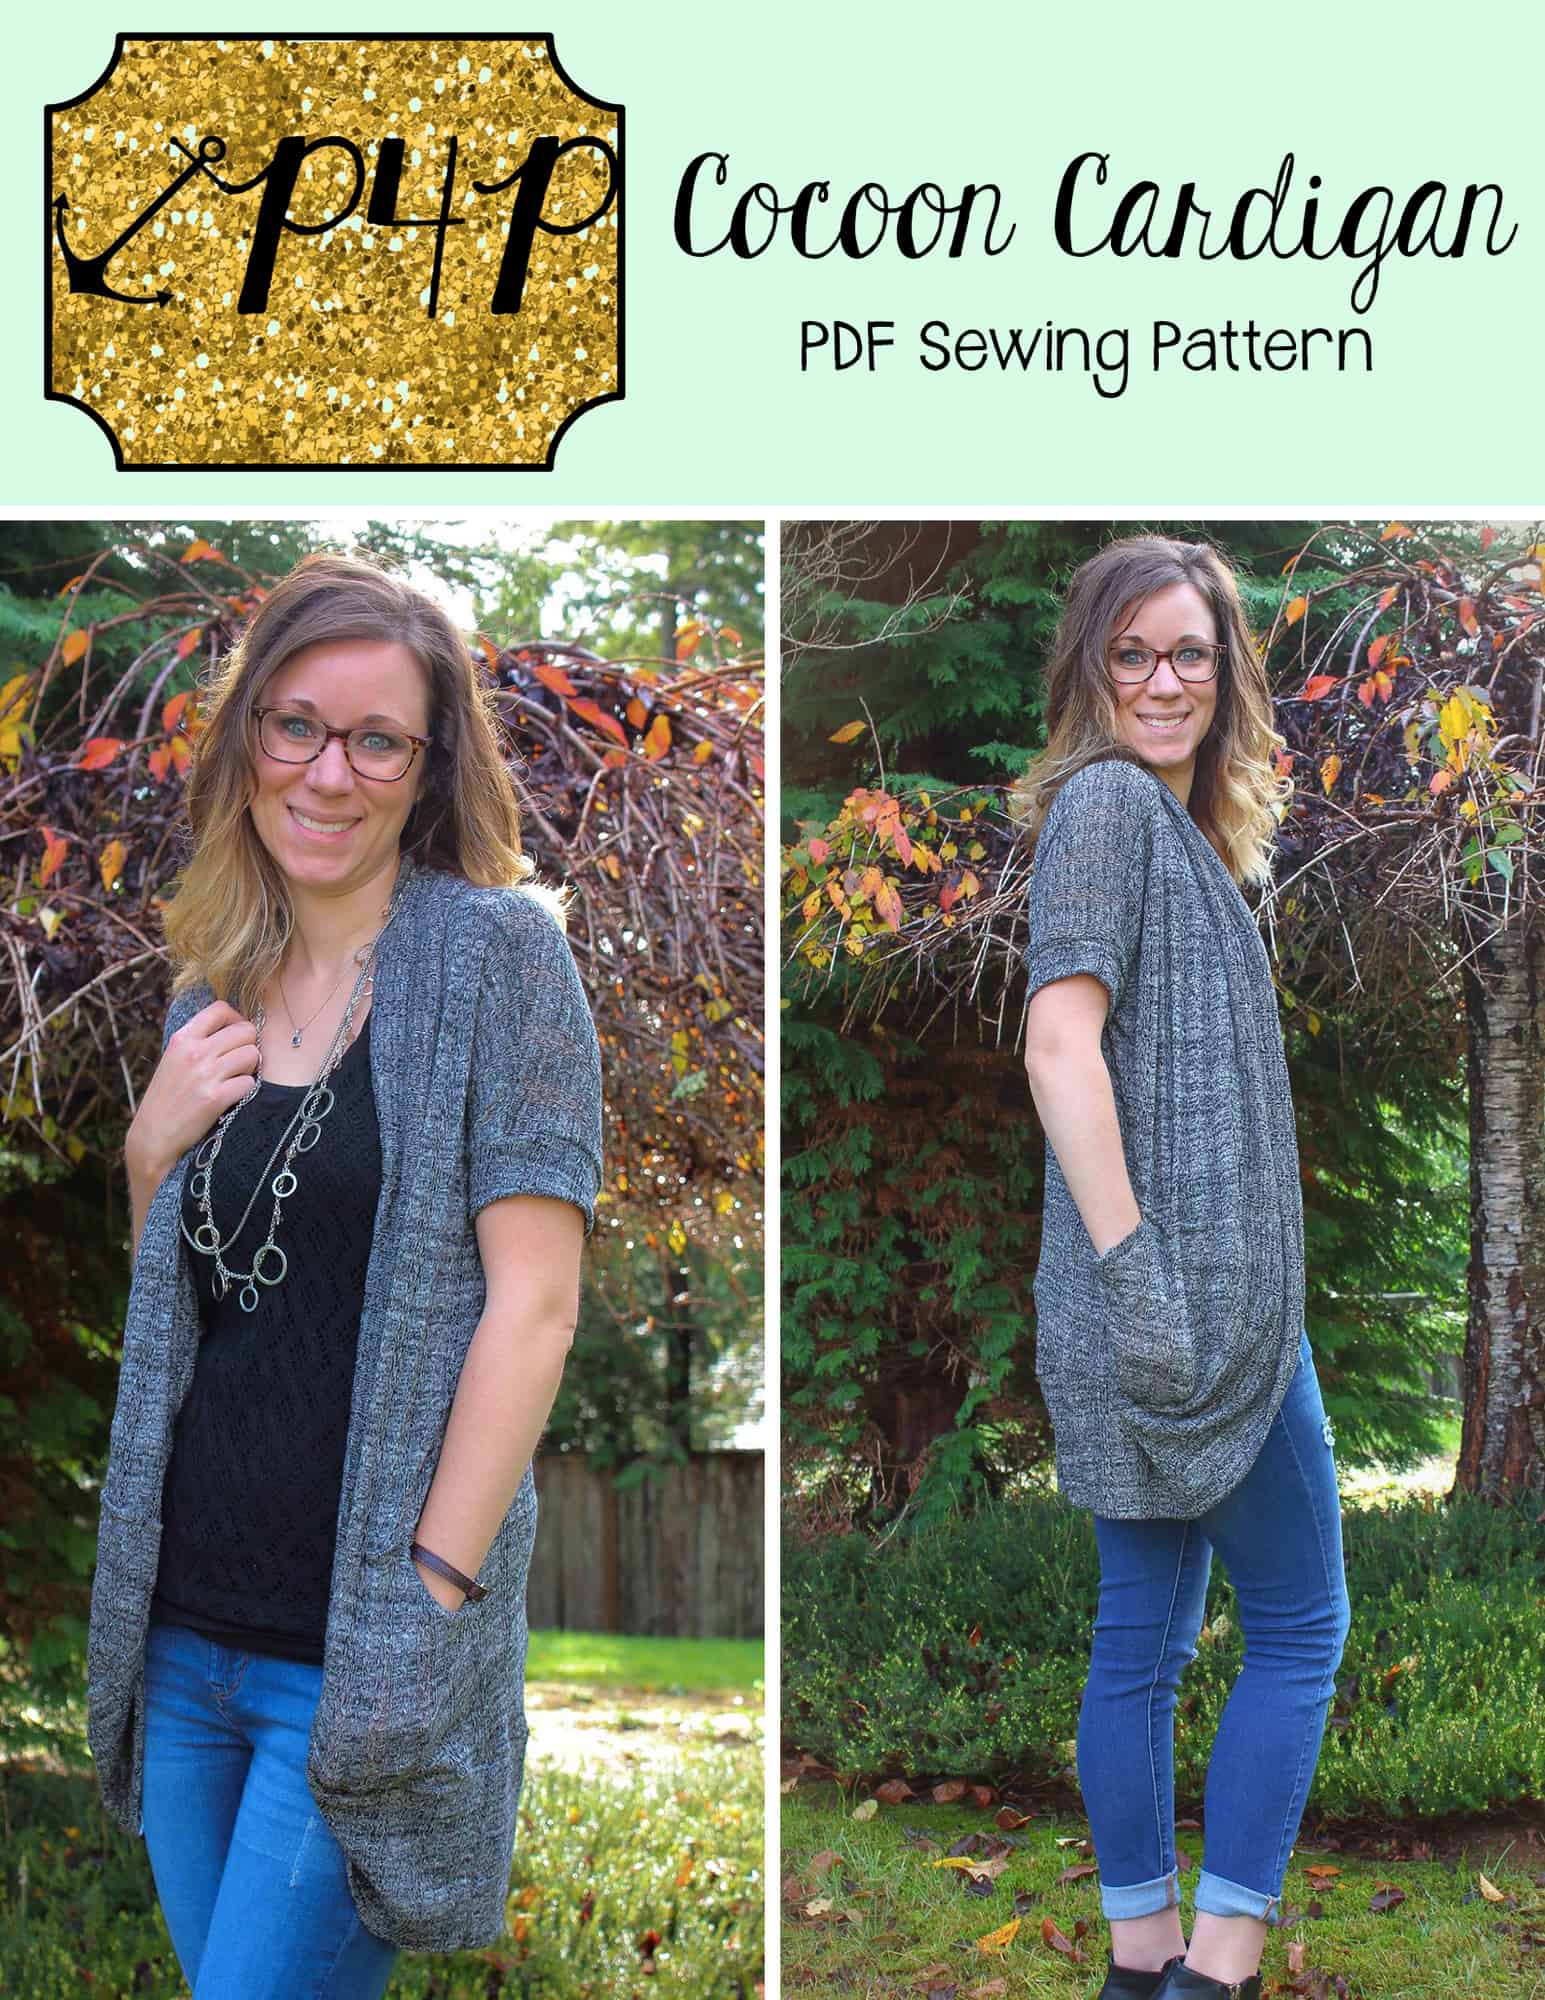 34+ Designs Patterns For Pirates Cocoon Cardigan - RossellaElspet